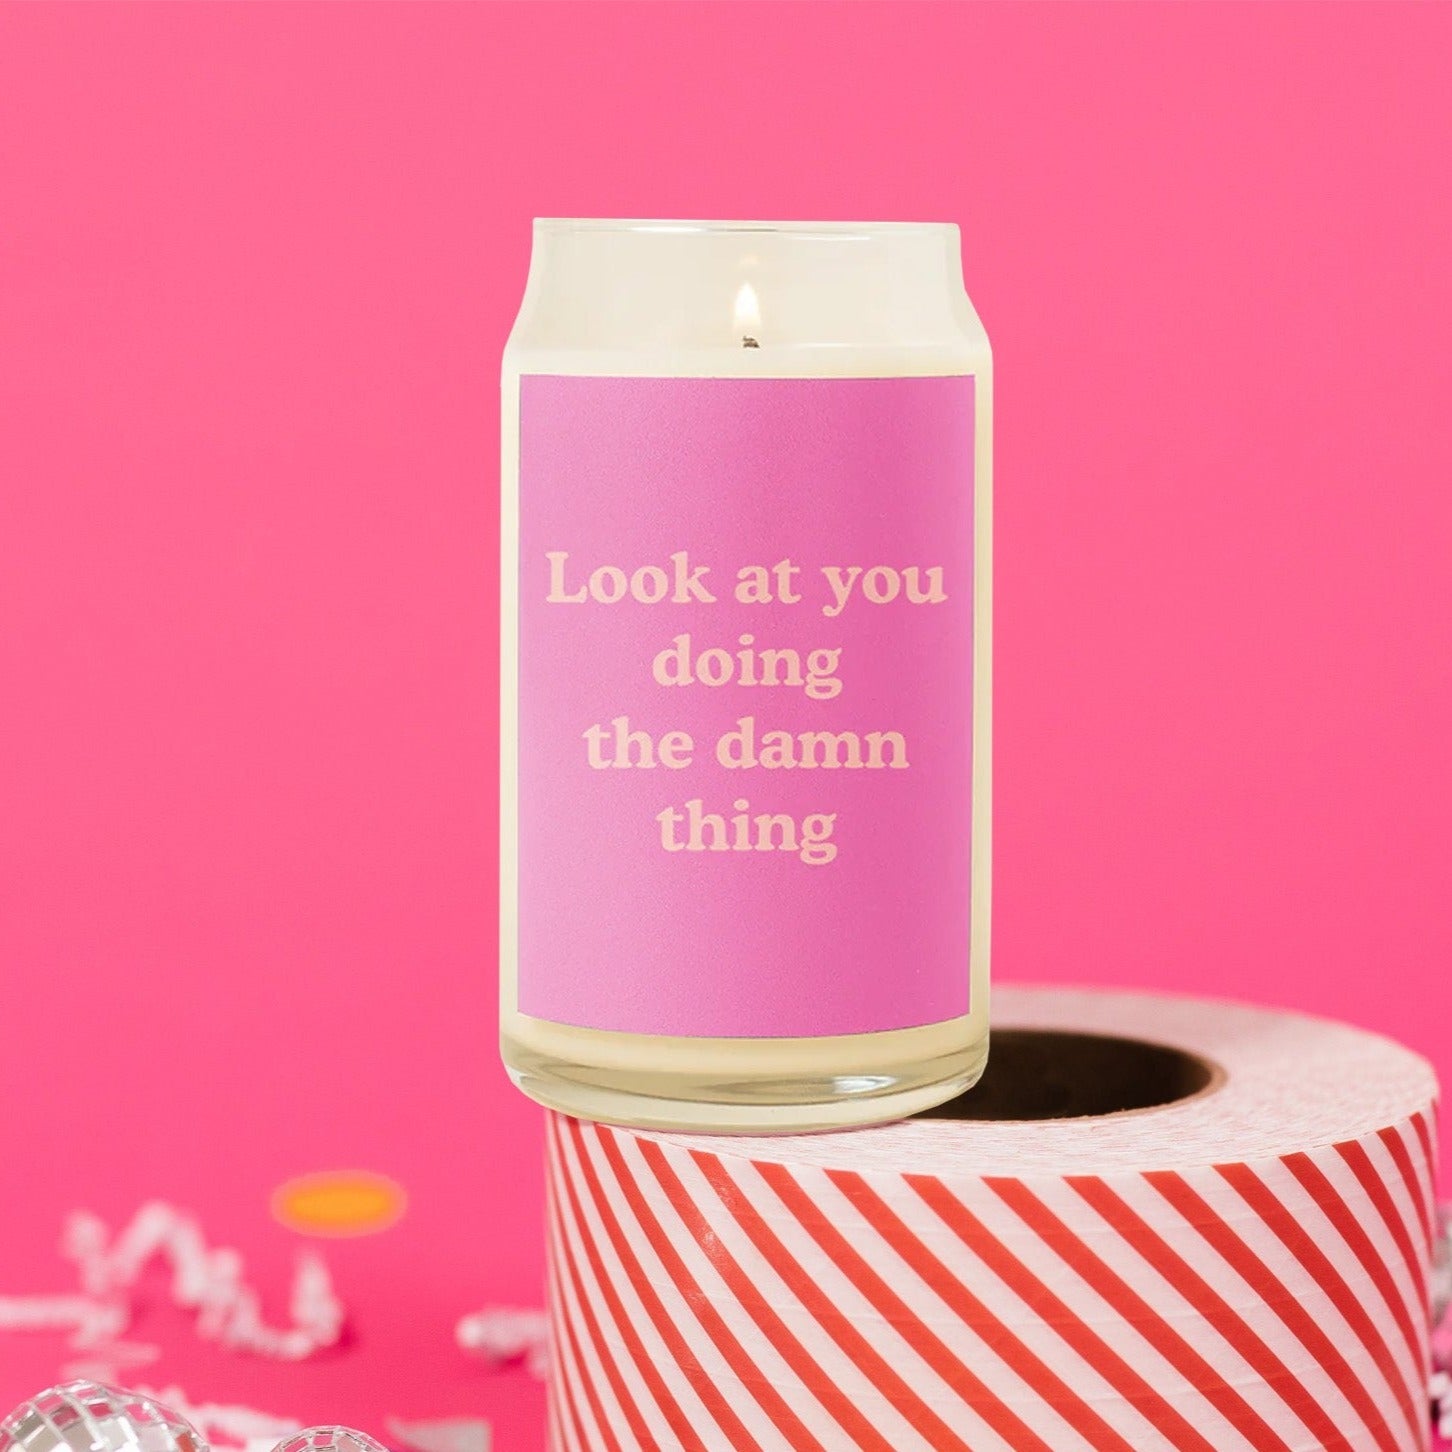 On a hot pink background sits a candle on a roll of red and white striped packing tape with white crinkle and big, colorful confetti scattered around.  The glass candle is lit and has a hot pink label on the front and it says "Look at you doing the damn thing" in a coral, thick serif font.